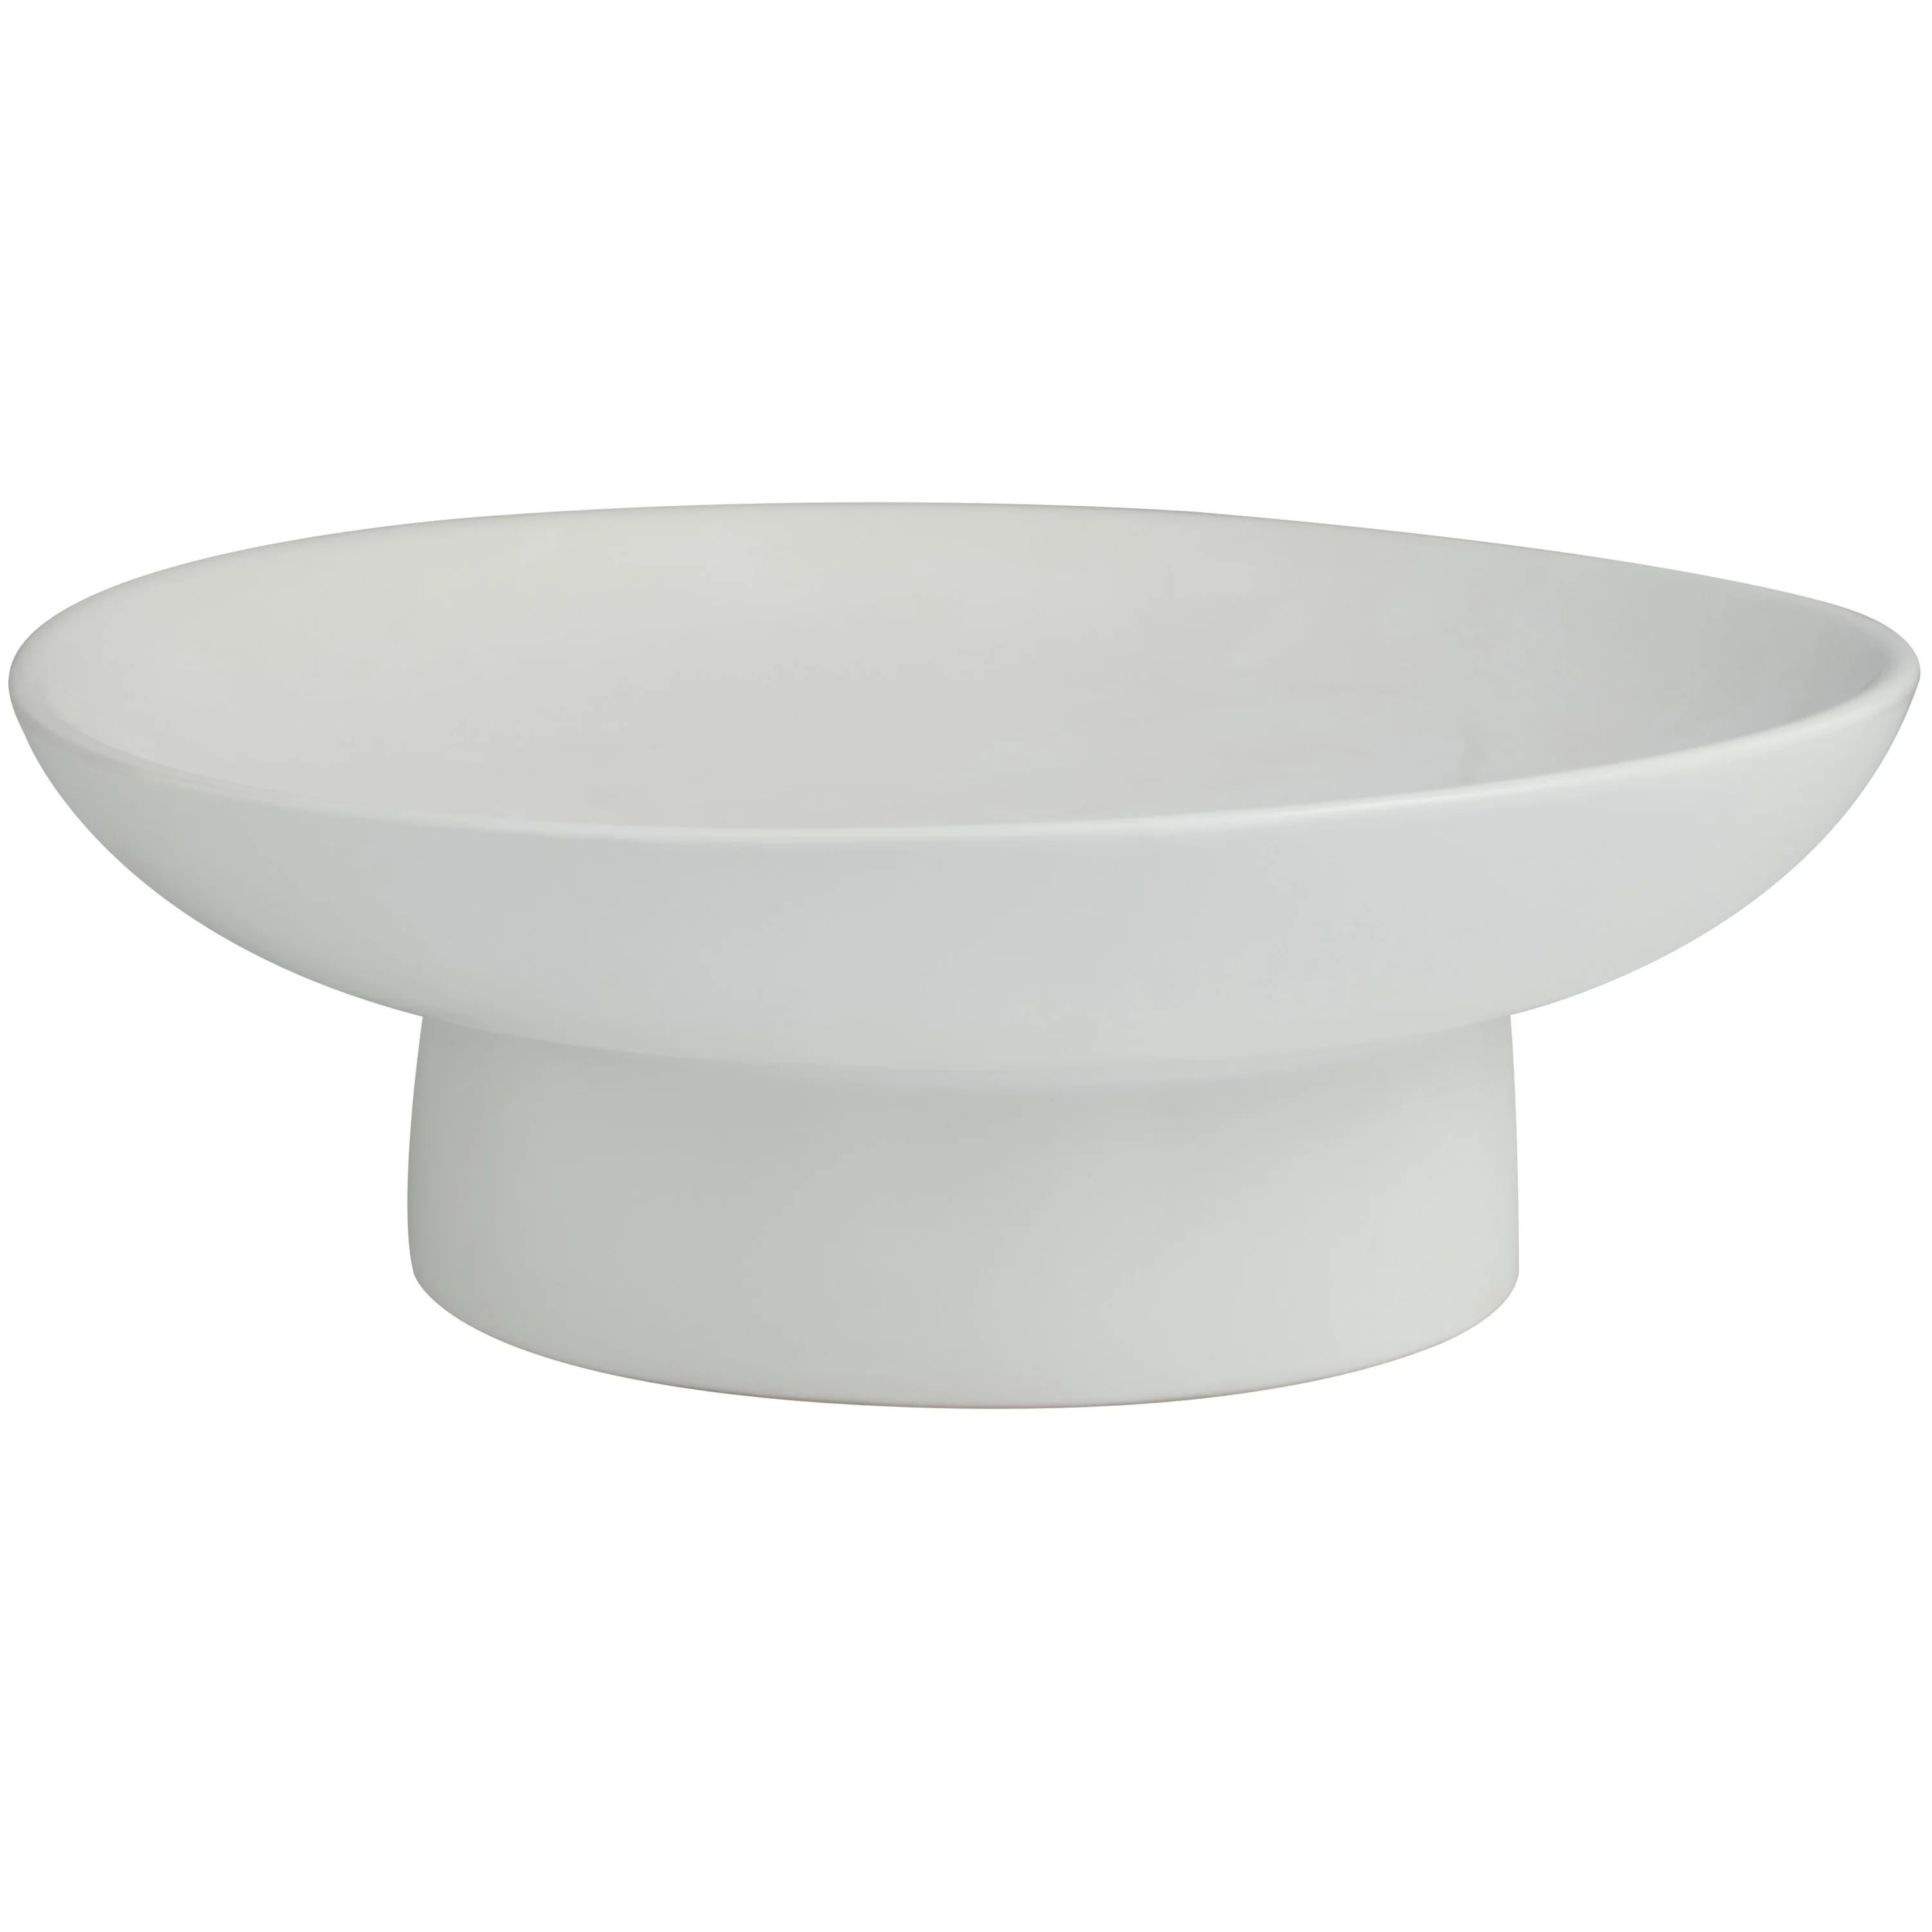 DecMode 16" Round Wide White Ceramic Decorative Bowl with Elevated Base | Walmart (US)